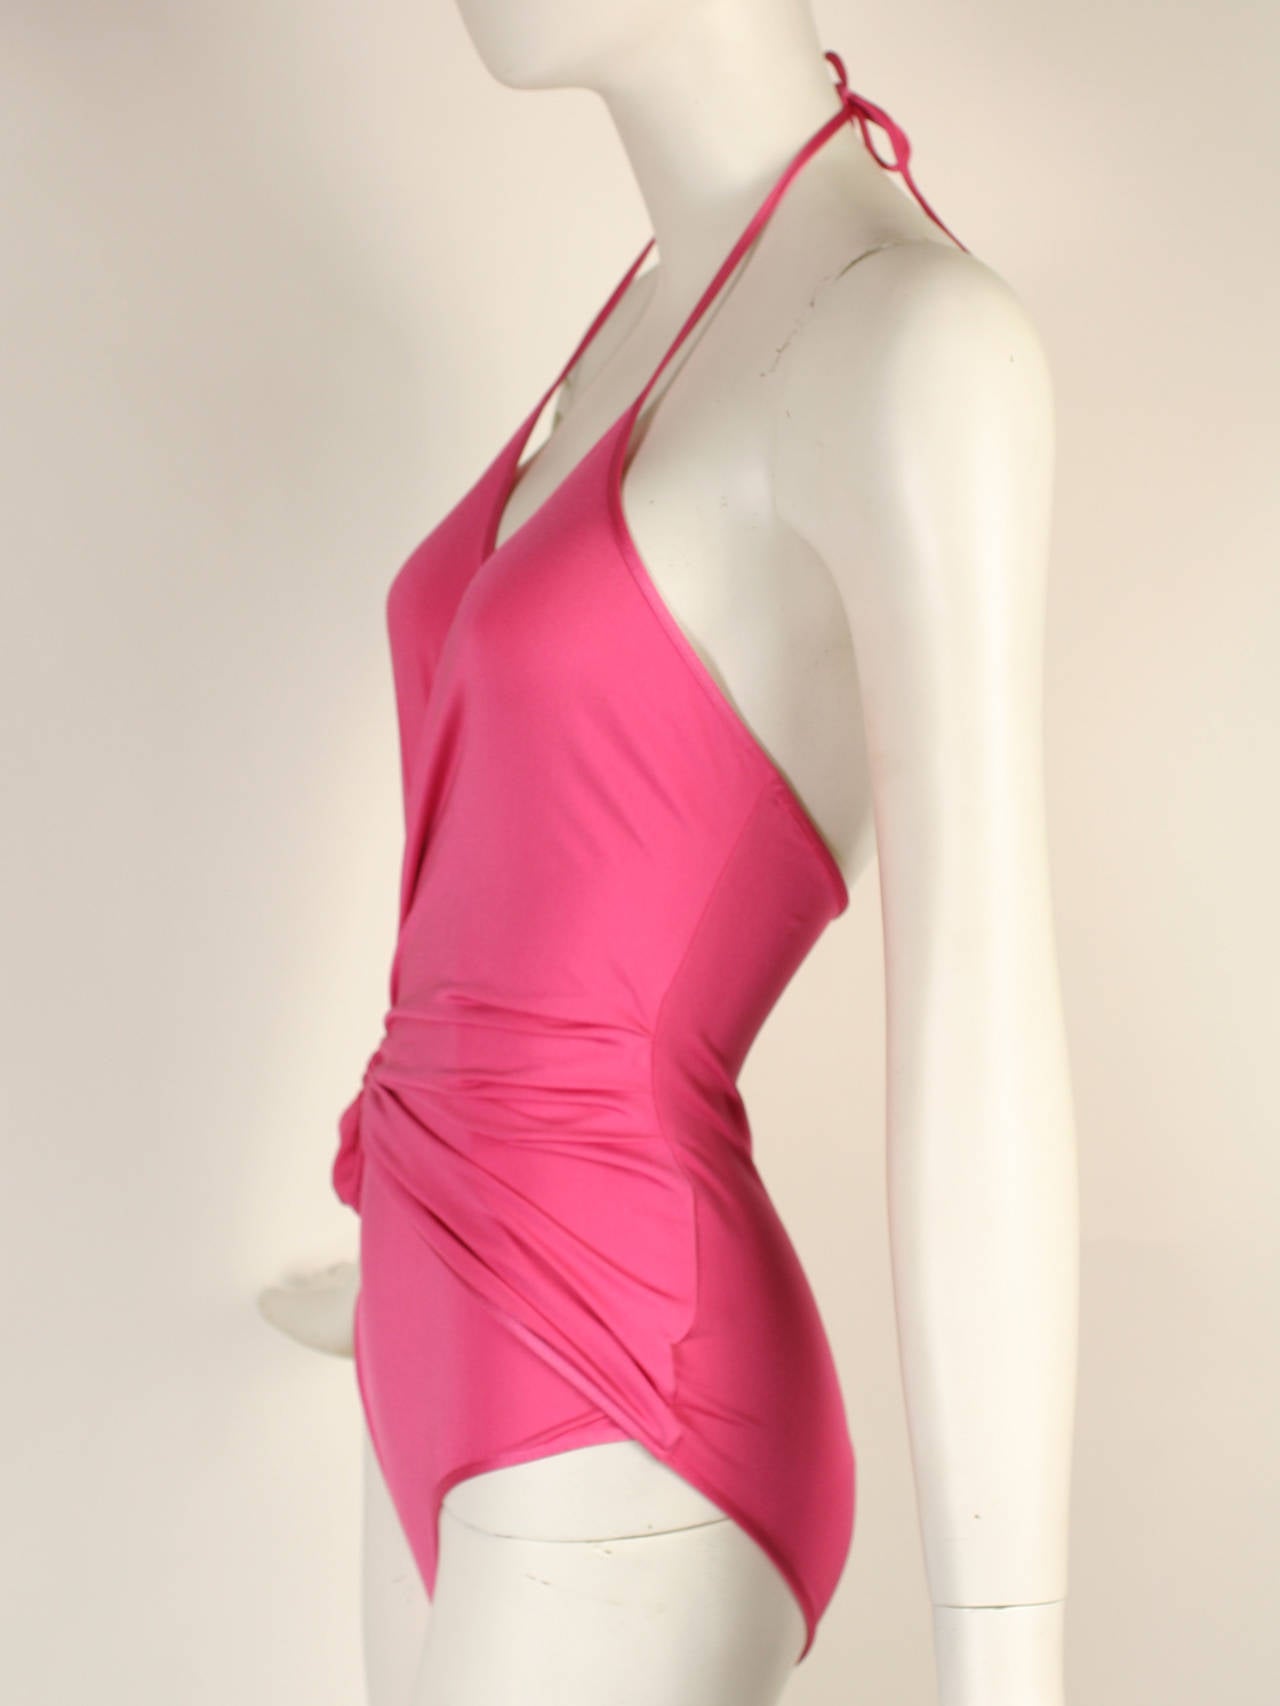 Women's Early Gianni Versace 1970s Pink Wrap Bathing Suit New with Tags For Sale